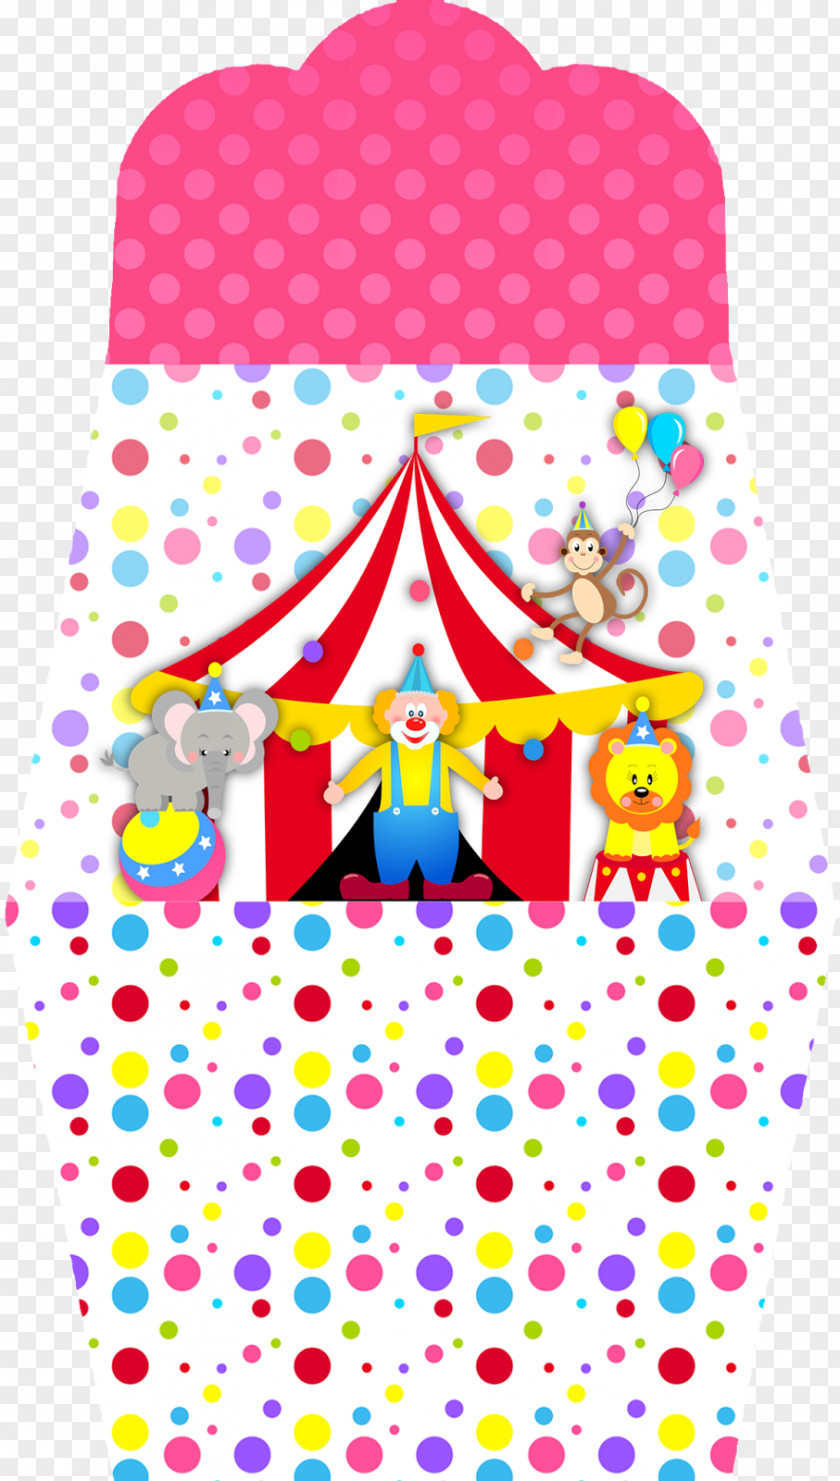 Circus Clown Party Convite PNG